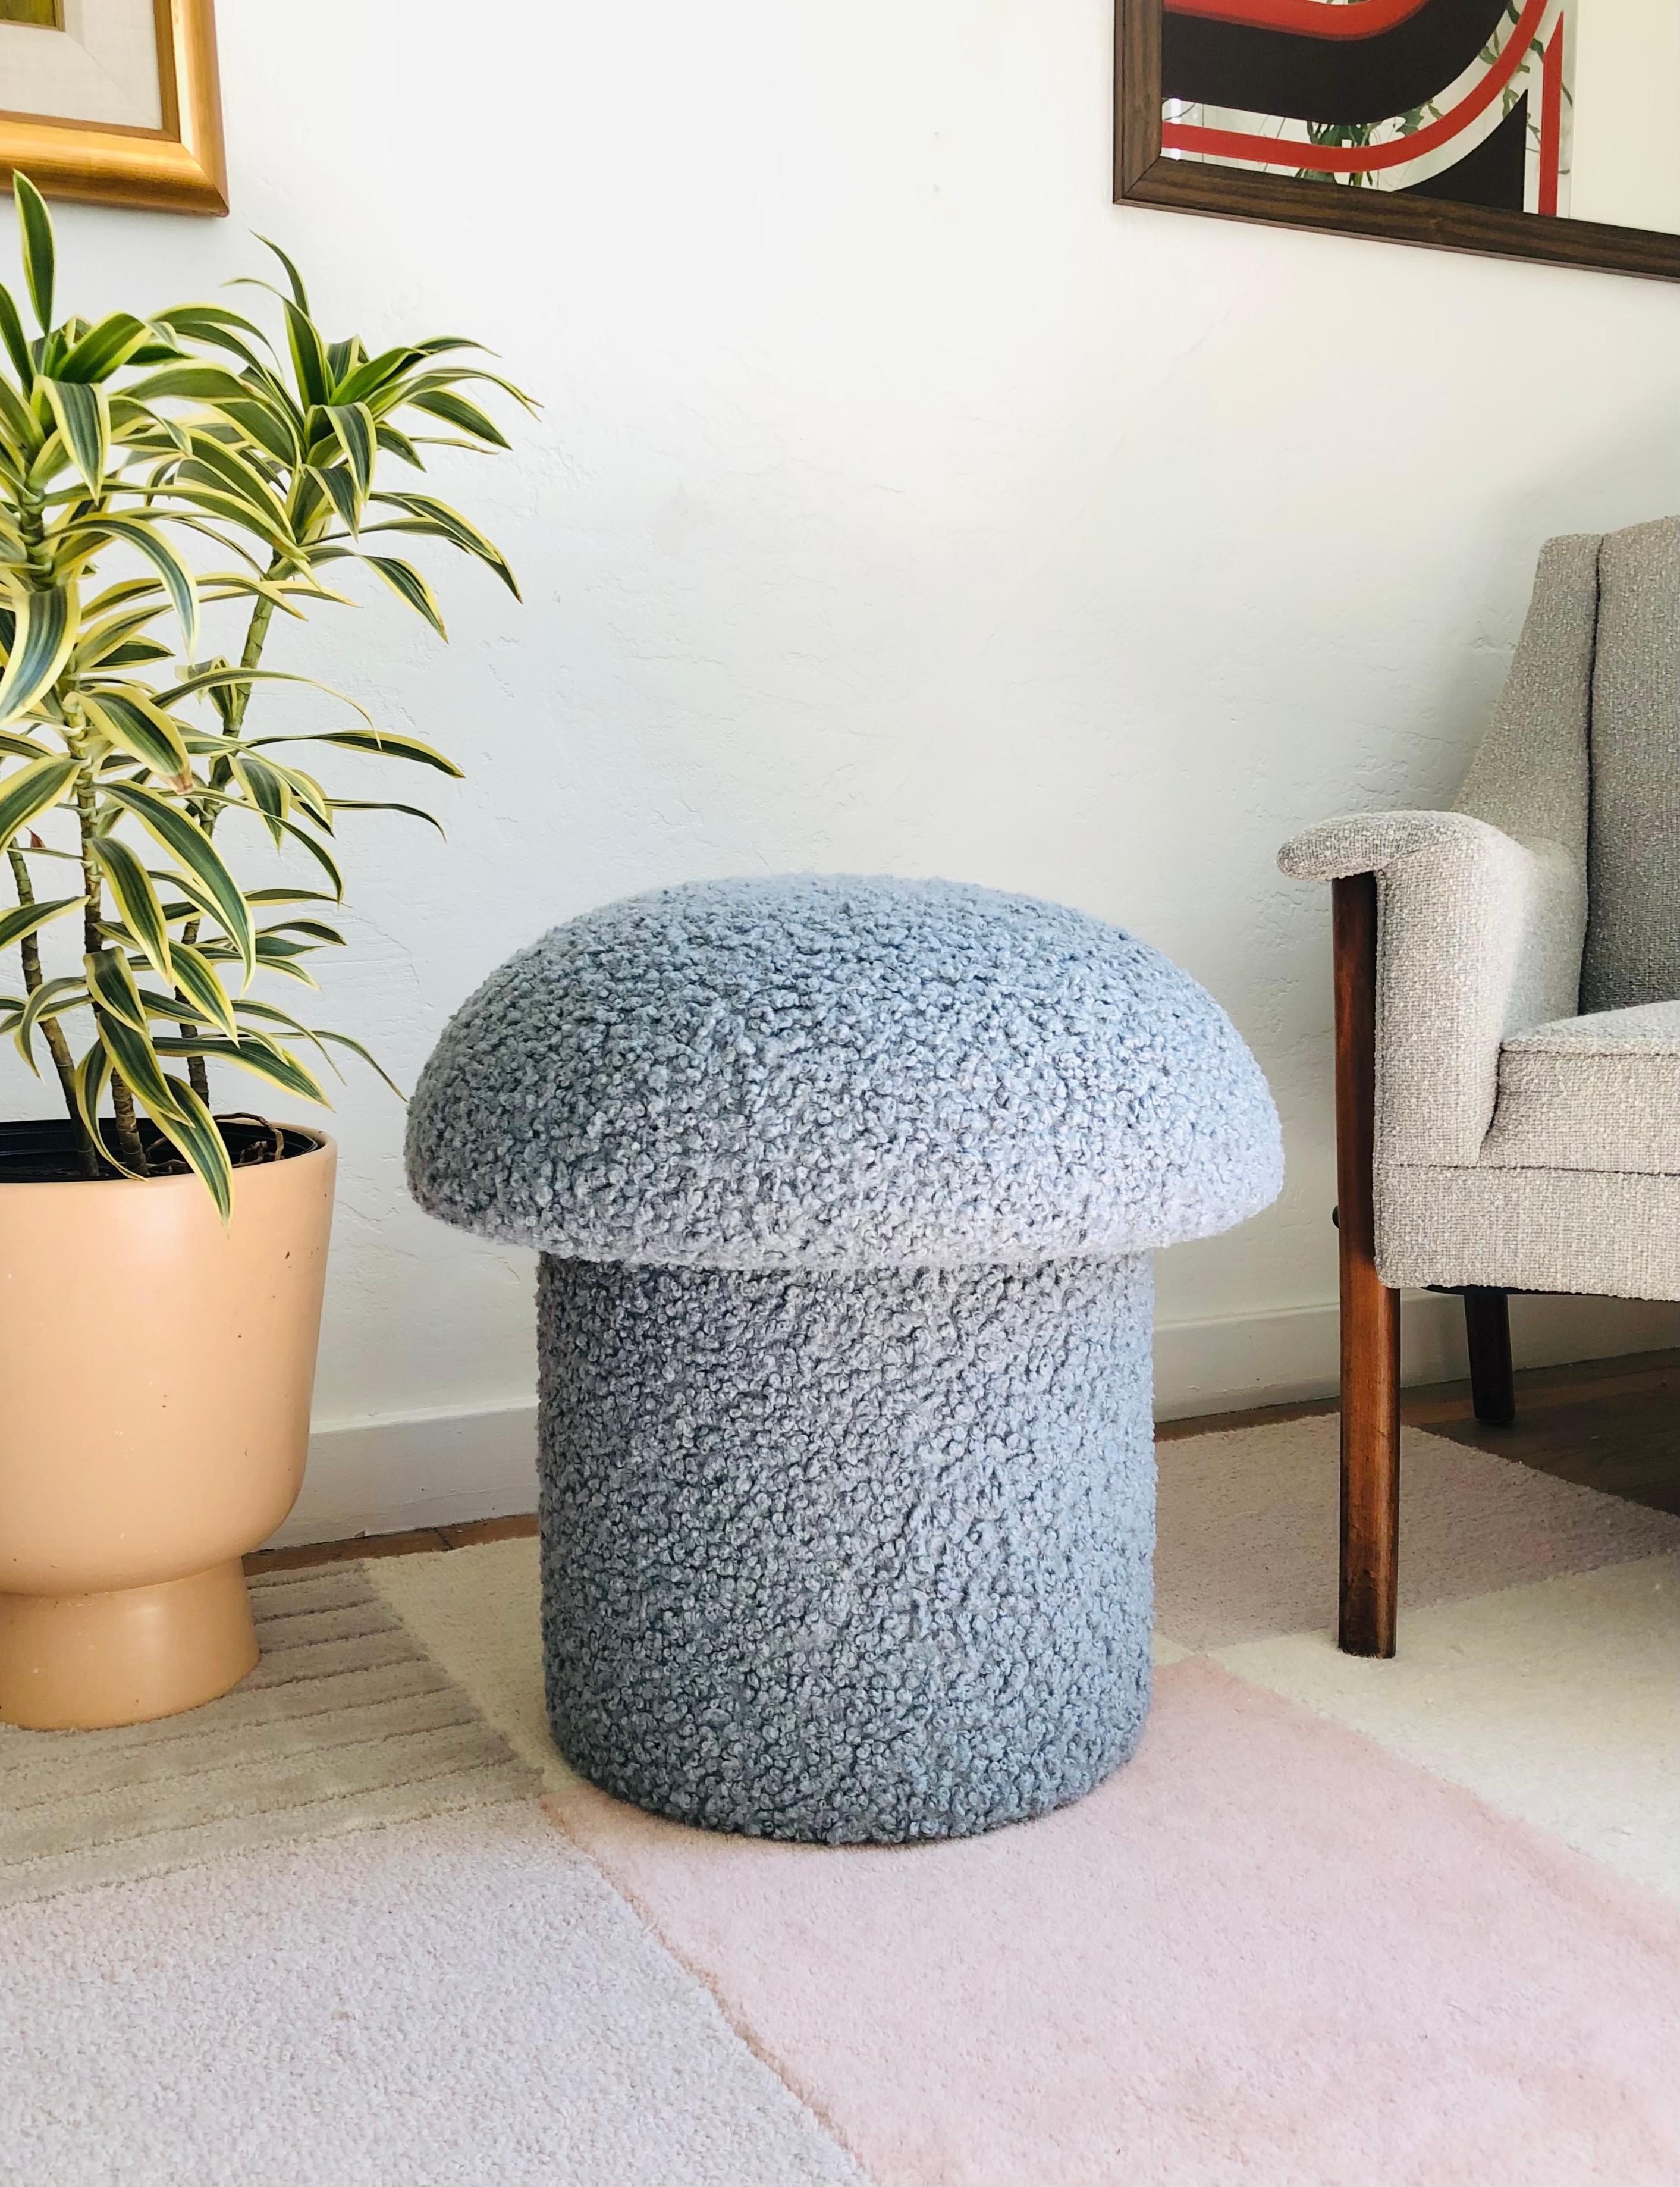 A handmade mushroom shaped ottoman, upholstered in a light blue colored curly boucle fabric. Perfect for using as a footstool or extra occasional seating. A comfortable cushioned seat and sculptural accent piece.
Mushroom ottomans are made to